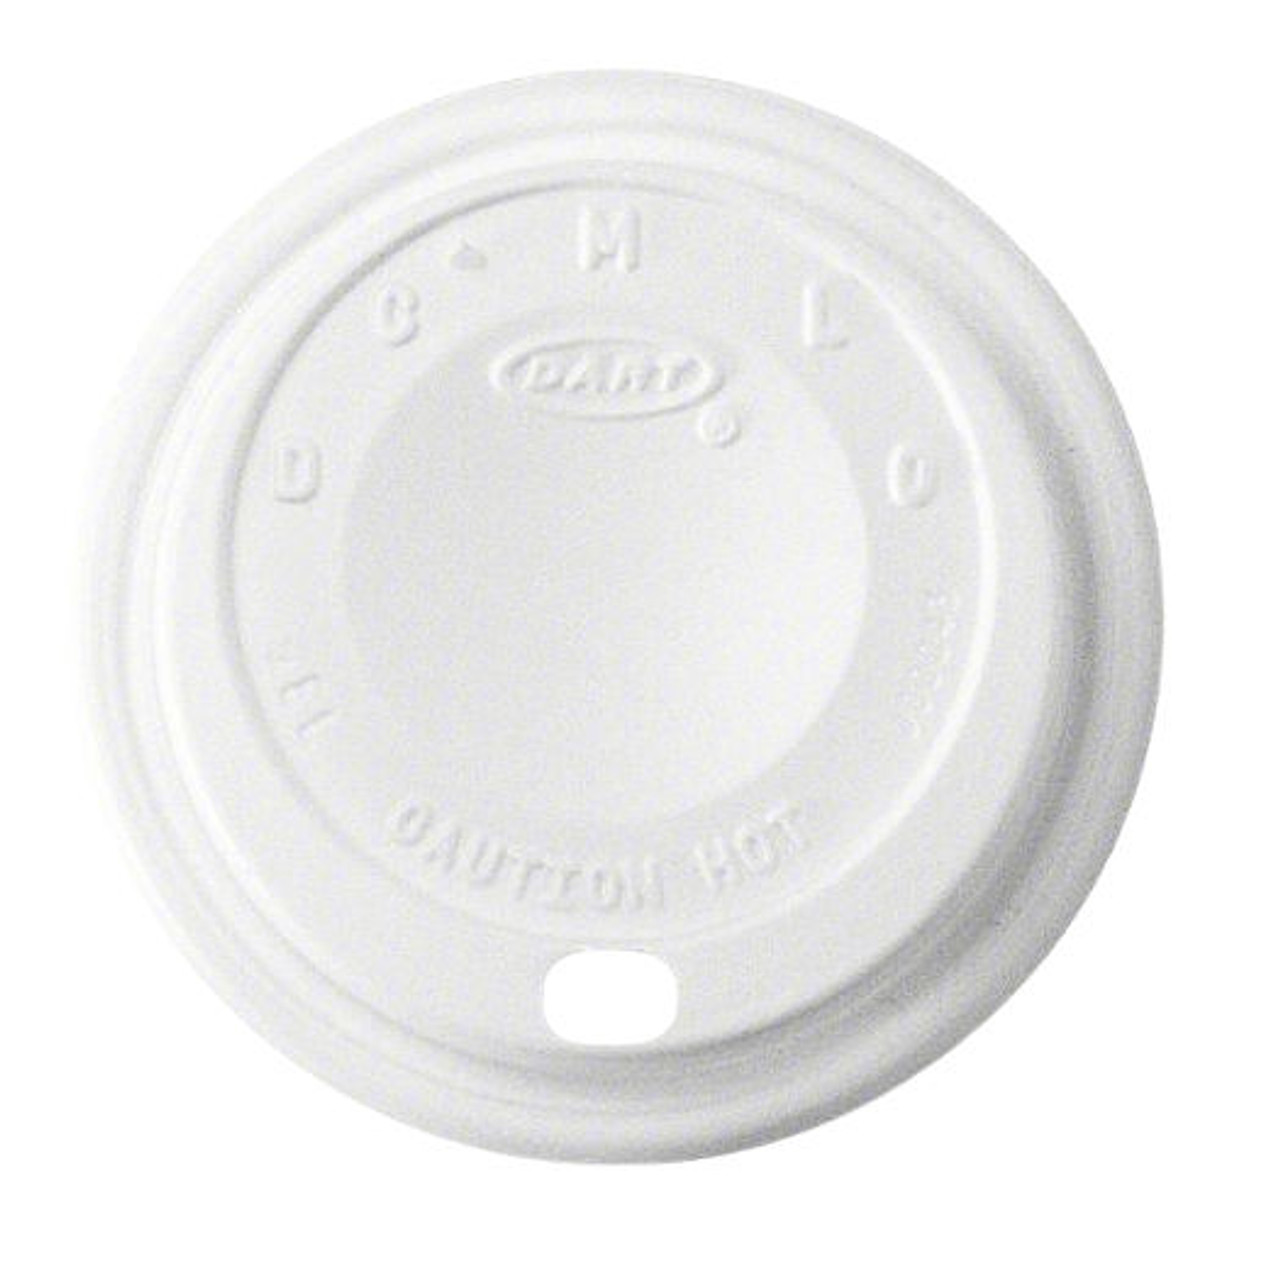 Dome Sip Thro Lids for ( Dart 10oz Polystyrene cups ) Pack x 100